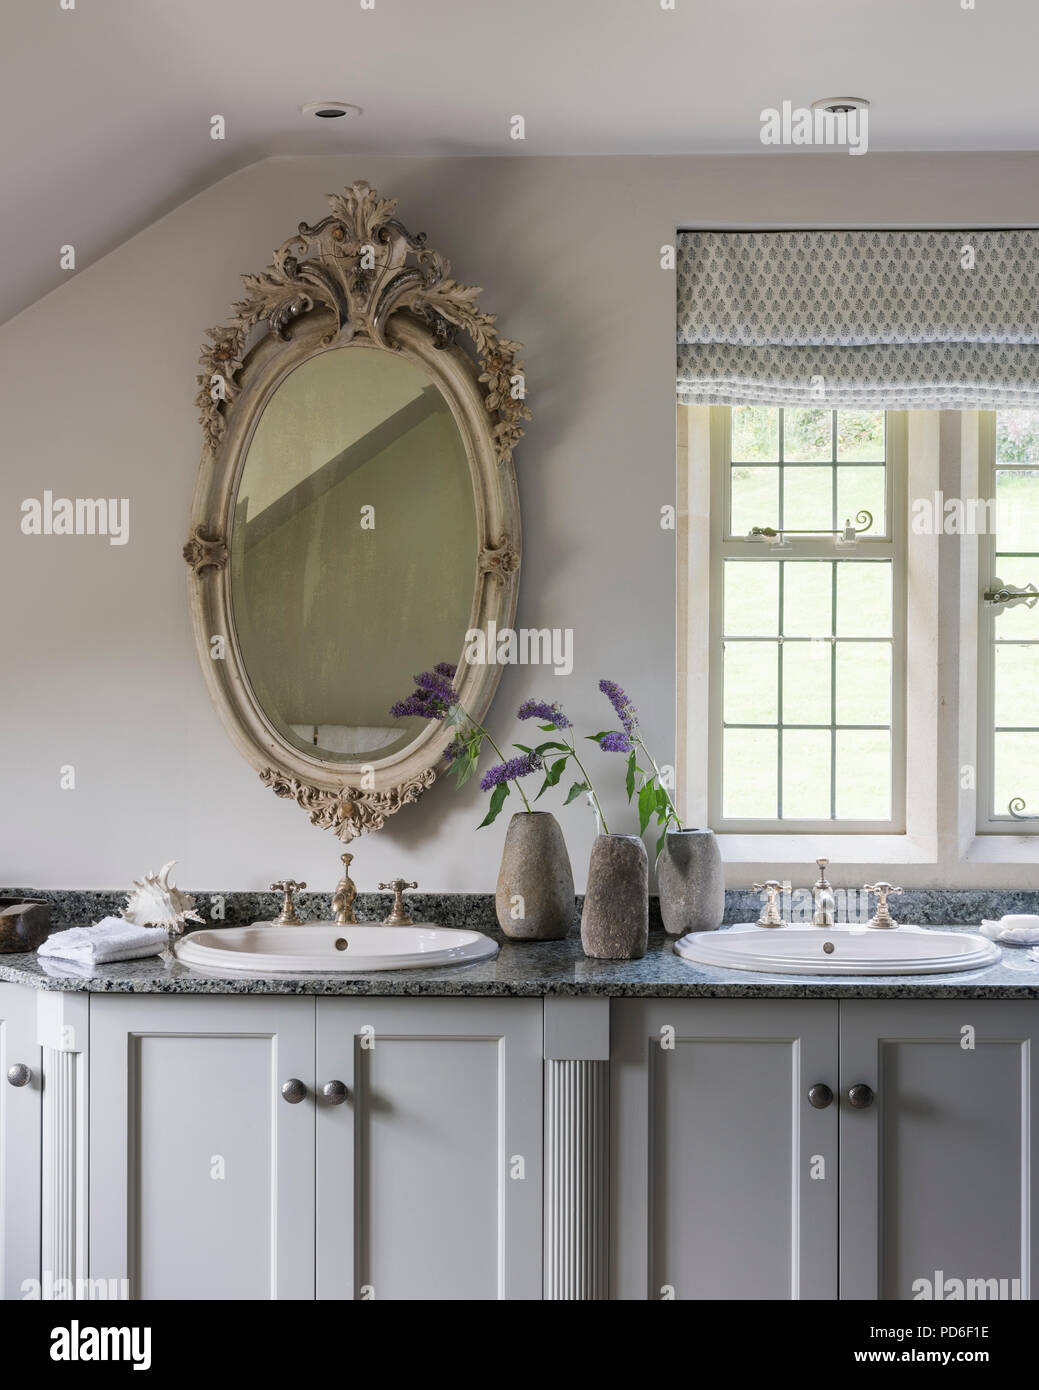 Decorative antique mirror above washbasin with single stem flowers in stoneware vases. Stock Photo